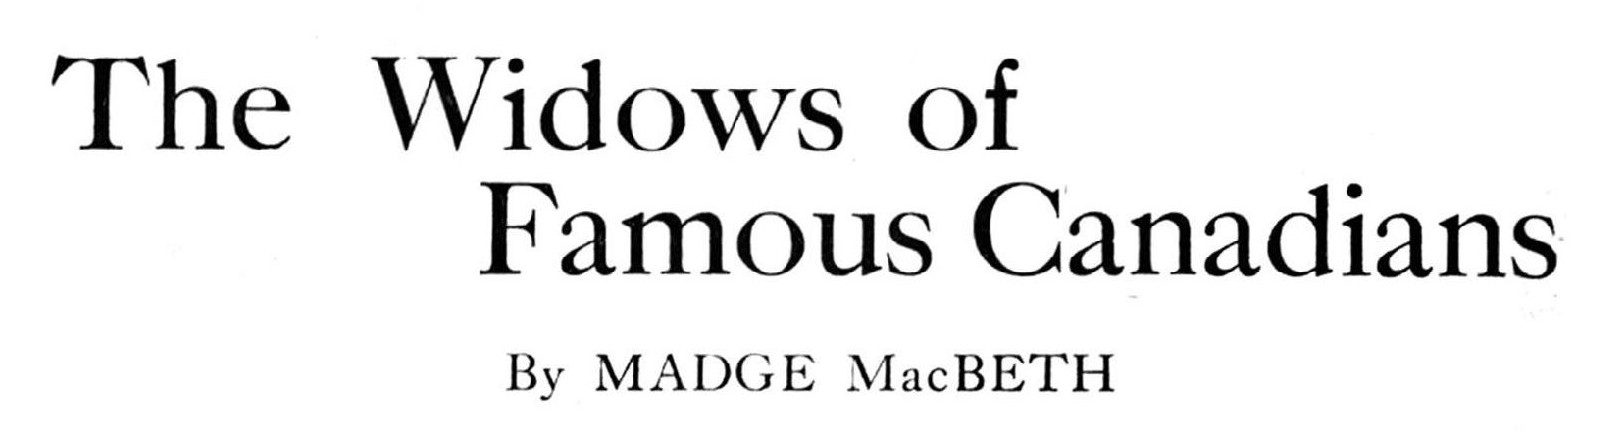 The Widows of Famous Canadians By MADGE MacBETH